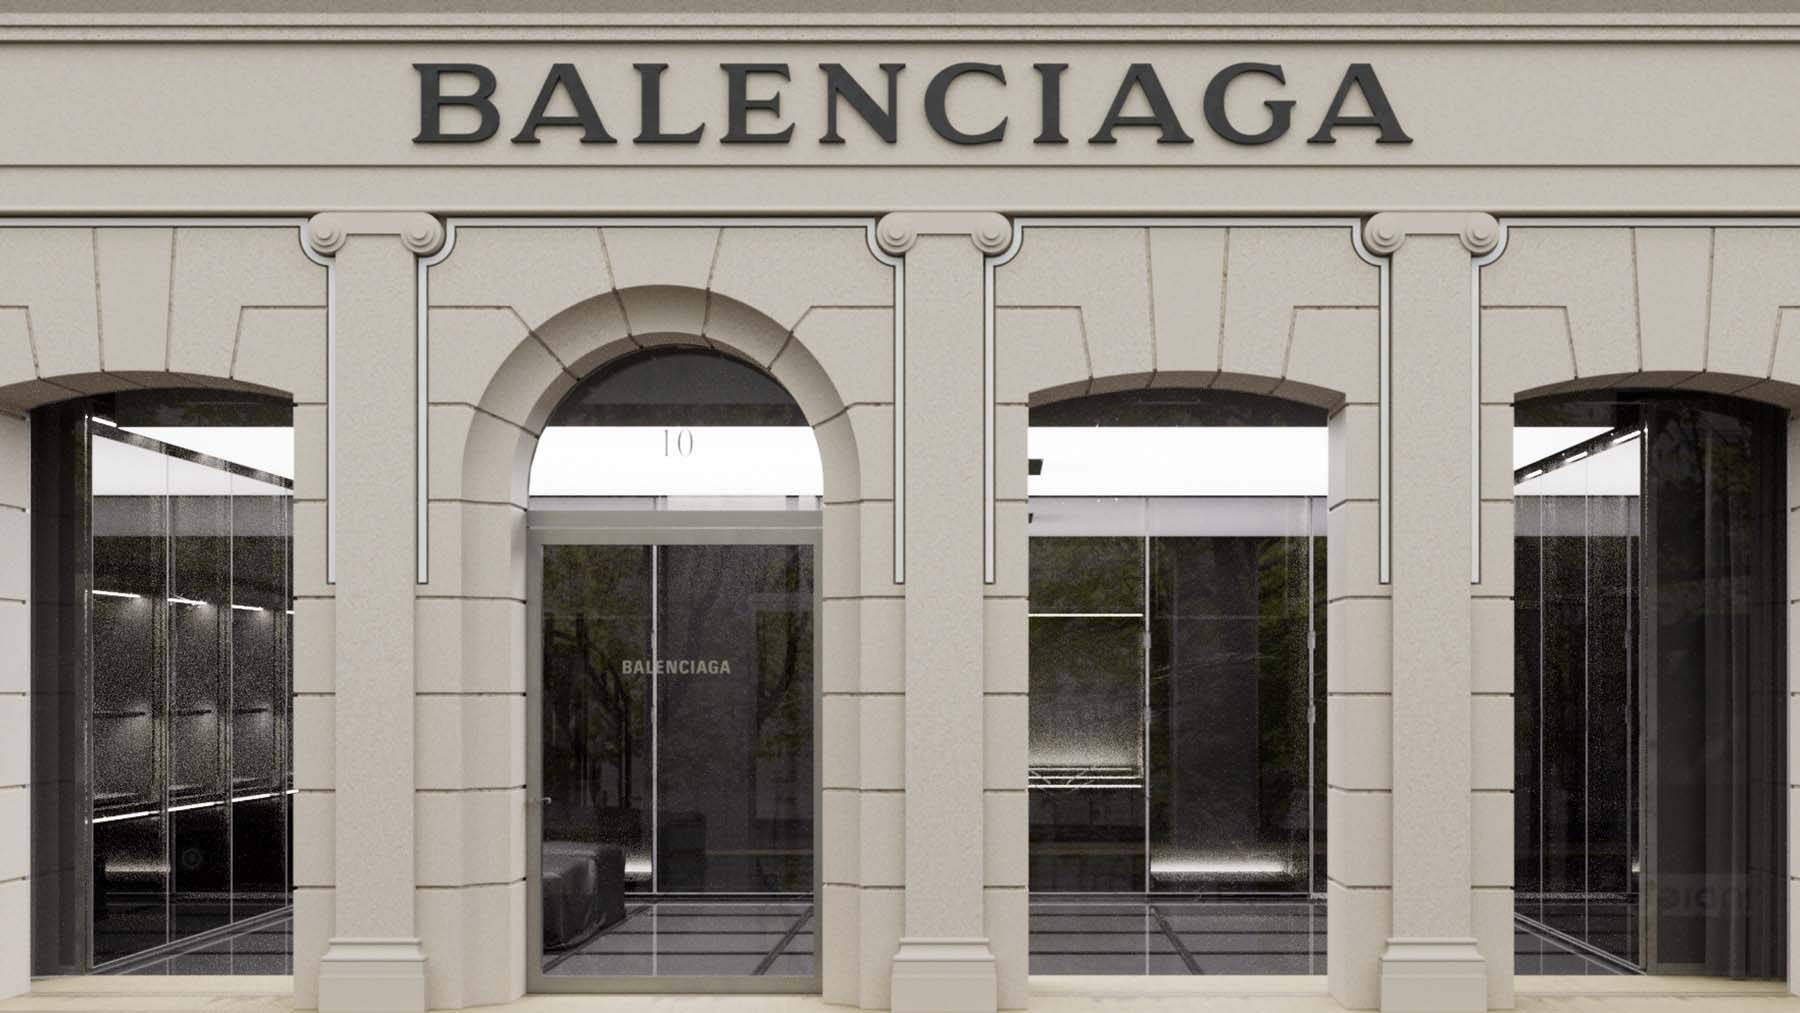 Balenciaga is opening a ‘couture store’ on Paris’ Avenue George V.